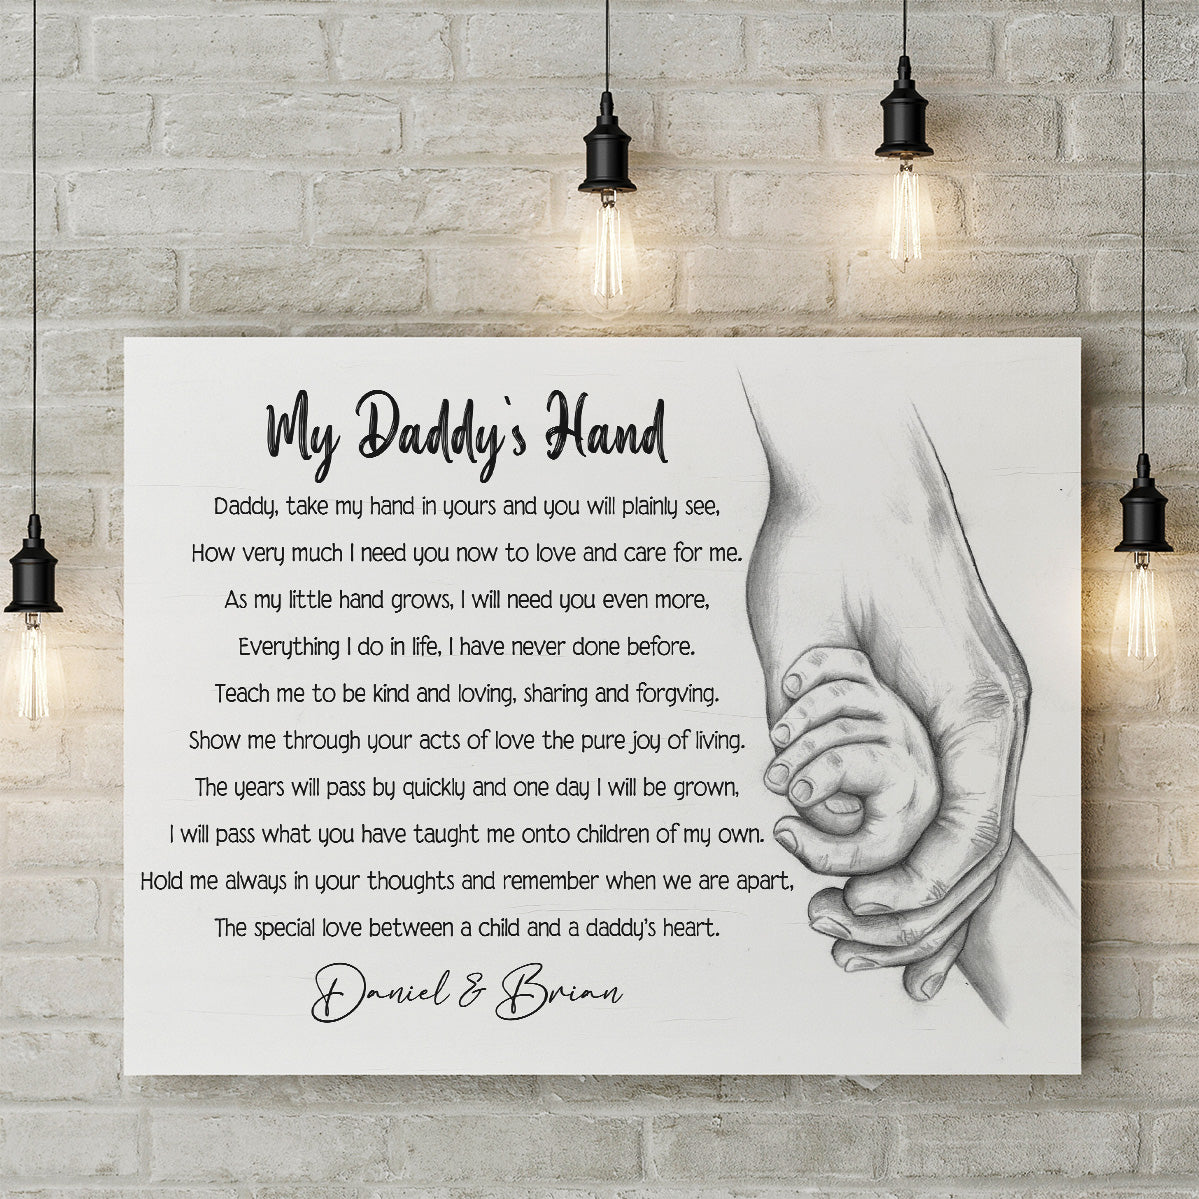 Personalized Canvas For Dad Grandpa, Gift Ideas for Father's day, My DaddyÕs Hand My Grandpa's Hand, Customize Message from Son Daughter